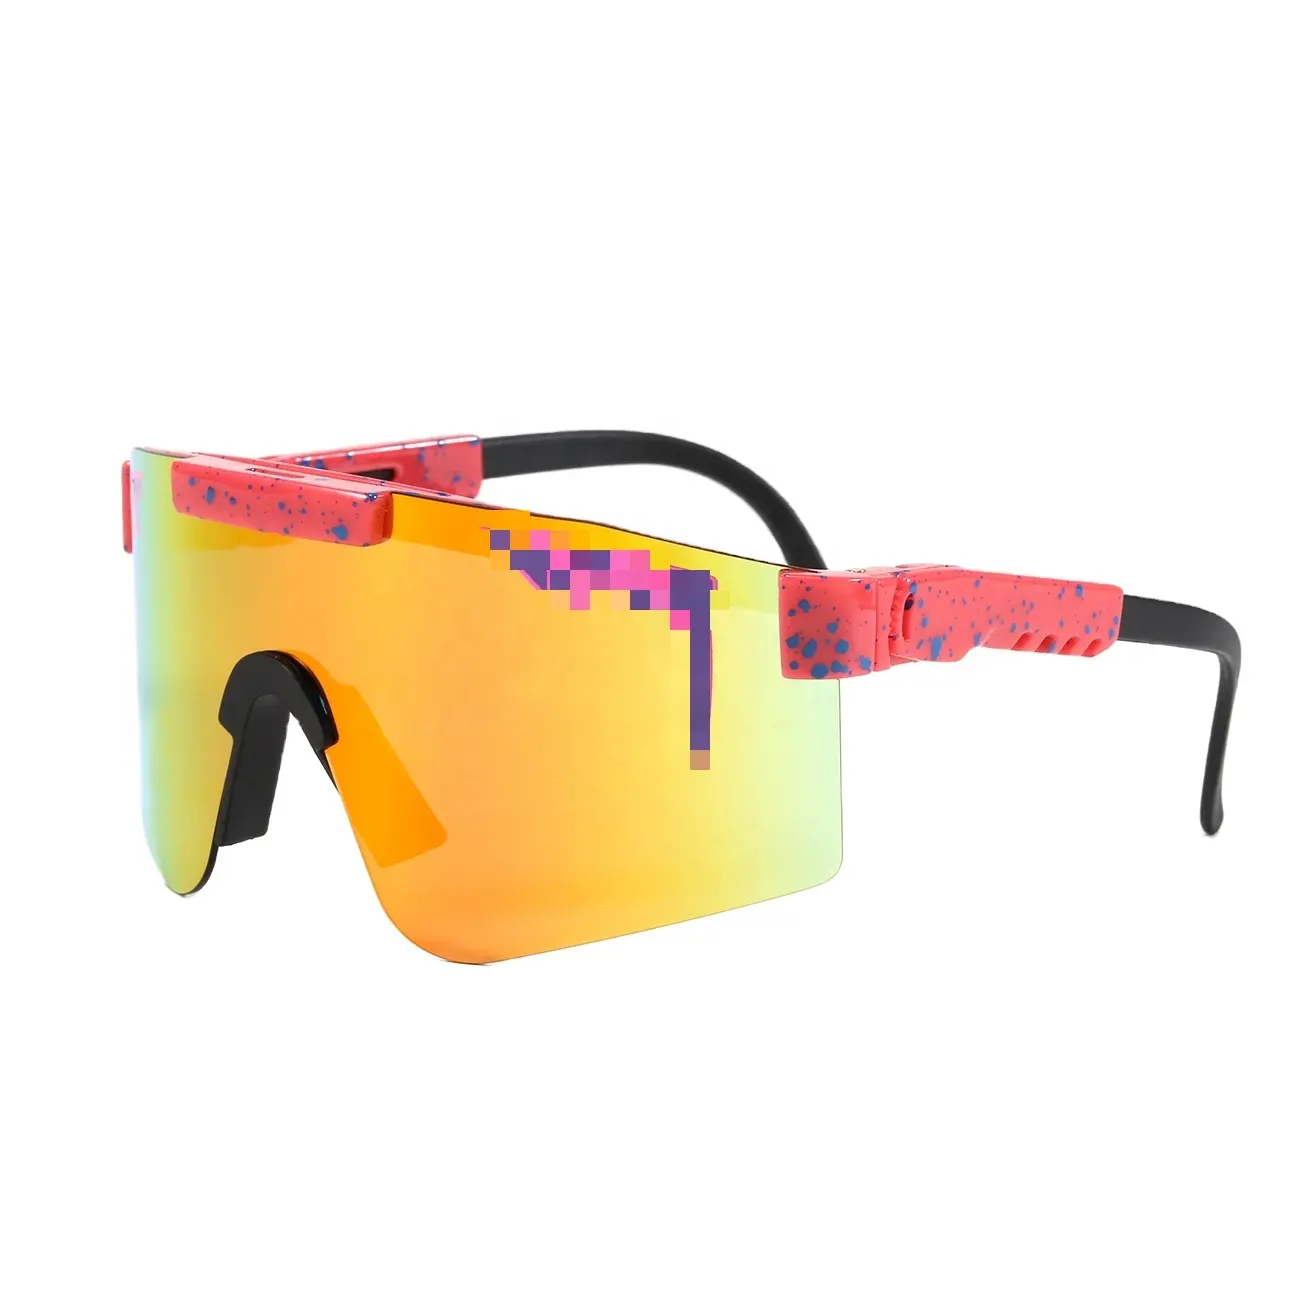 New Sport Vipers 27 Colors For Men And Women Sports Cycling Polarized Sunglasses Outdoors Eyewear Windproof Sun Glasses